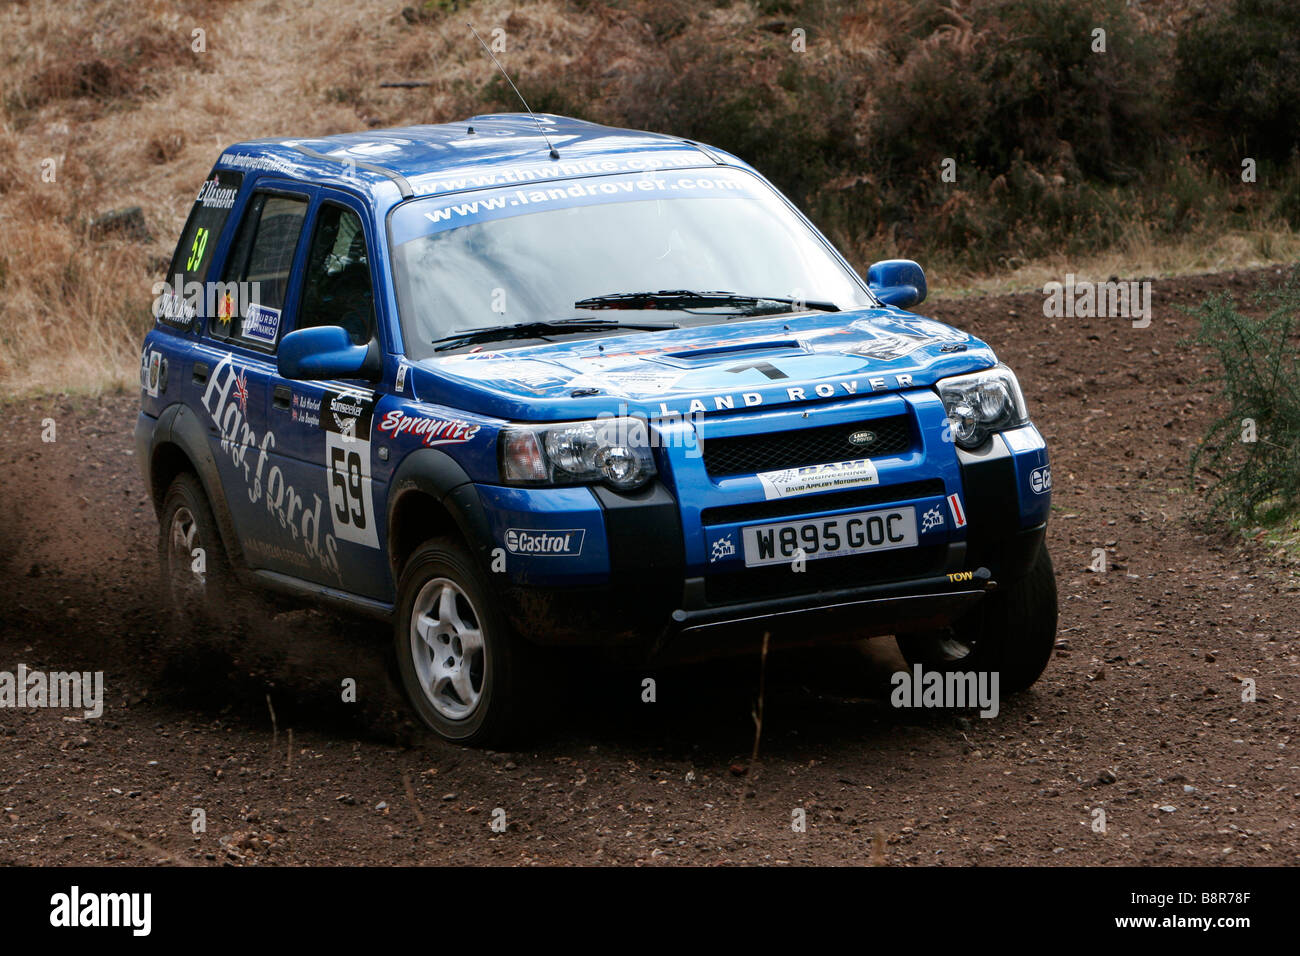 A Land Rover Freelander competing in the Rallye Sunseeker. Stock Photo